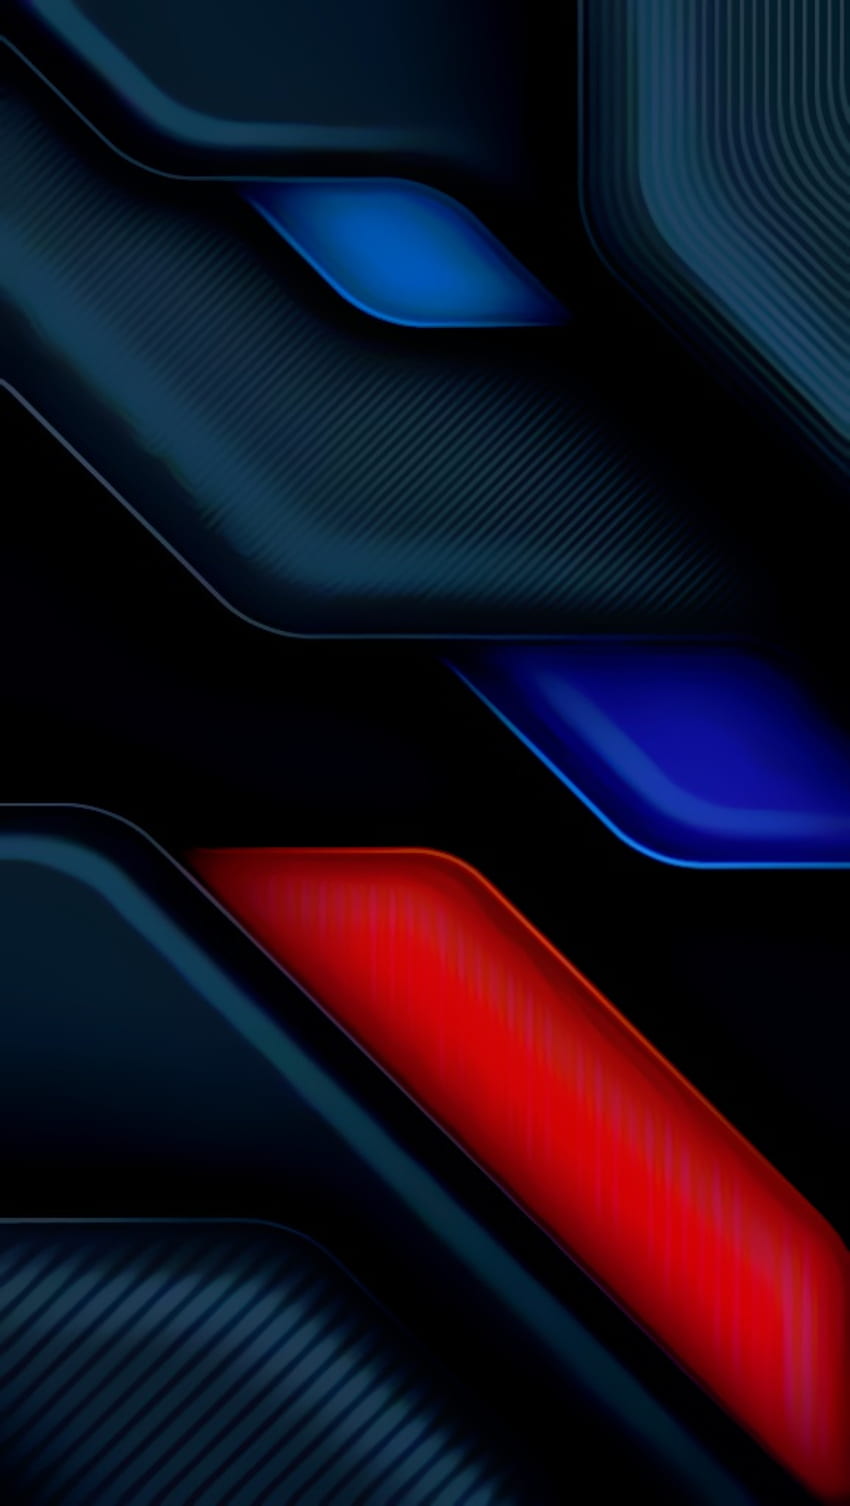 black red amoled neon, samsung, material, modern, texture, design, pattern, abstract, galaxy, smooth, ultra HD phone wallpaper